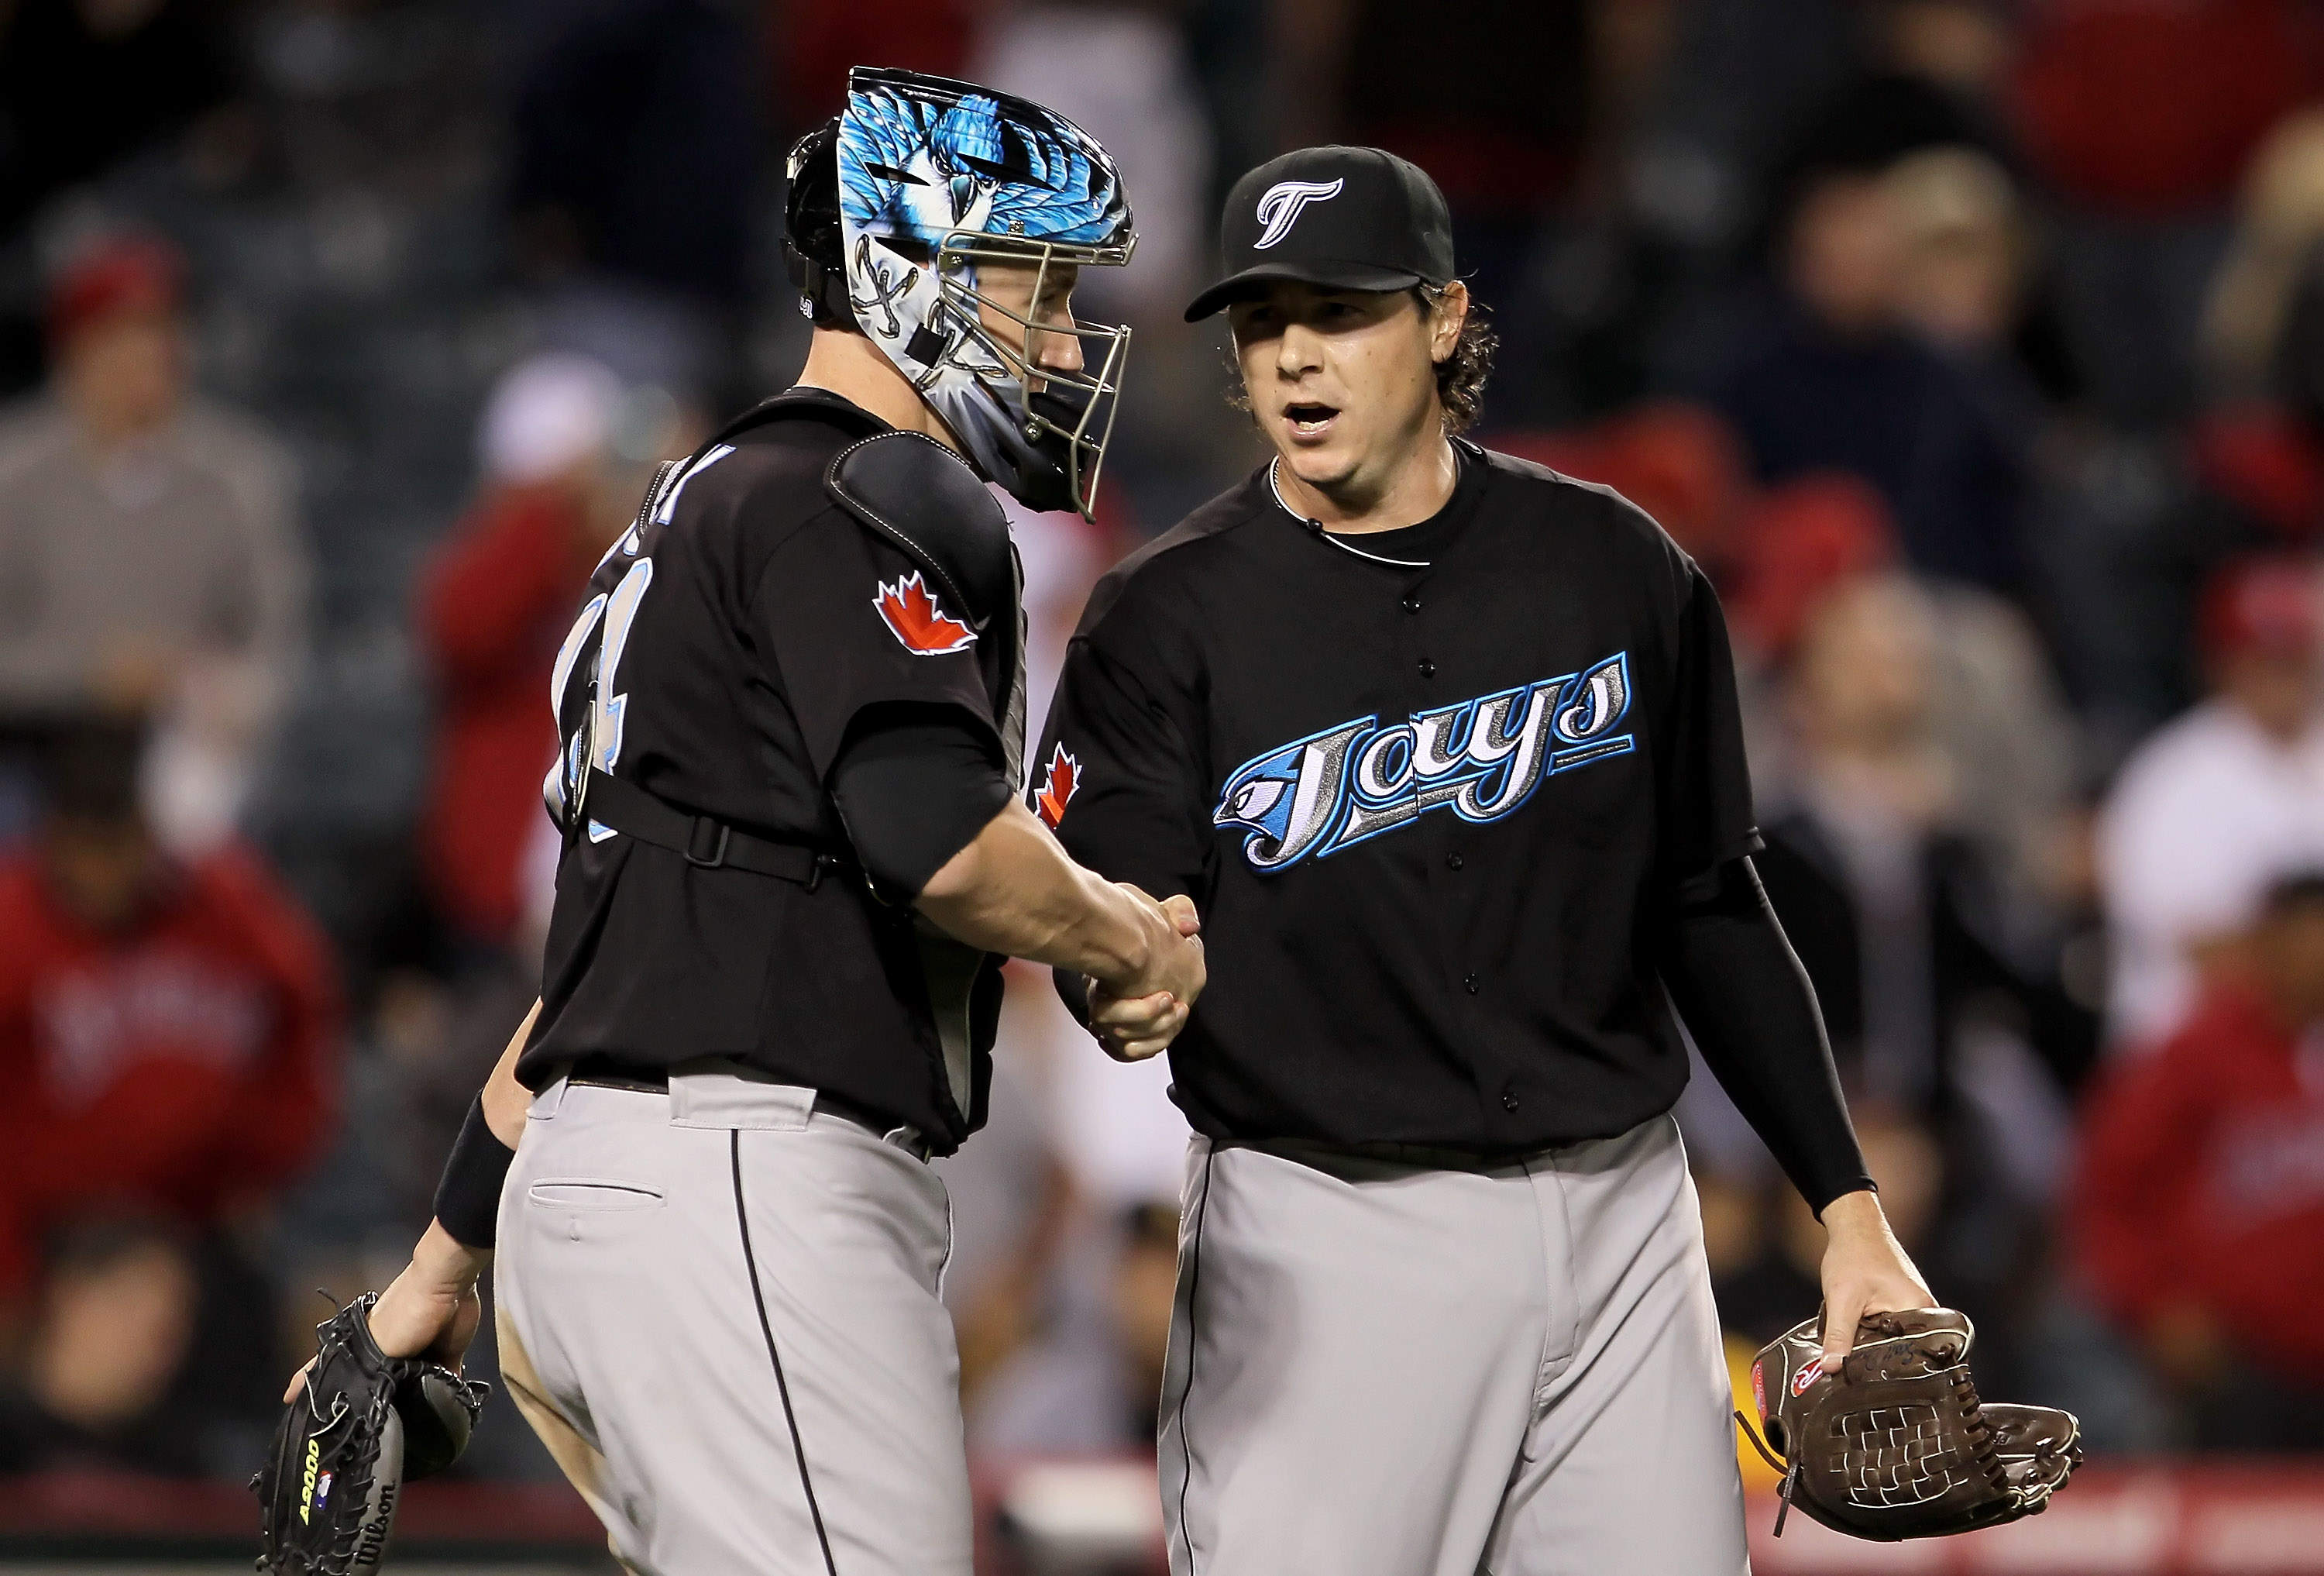 ANAHEIM, CA - MAY 24:  Catcher John Buck #14 and relief pitcher Scott Downs #37 of the Toronto Blue Jays congratulate each other following their victory over the Los Angeles Angels of Anaheim at Anaheim Stadium on May 24, 2010 in Anaheim, California. The 